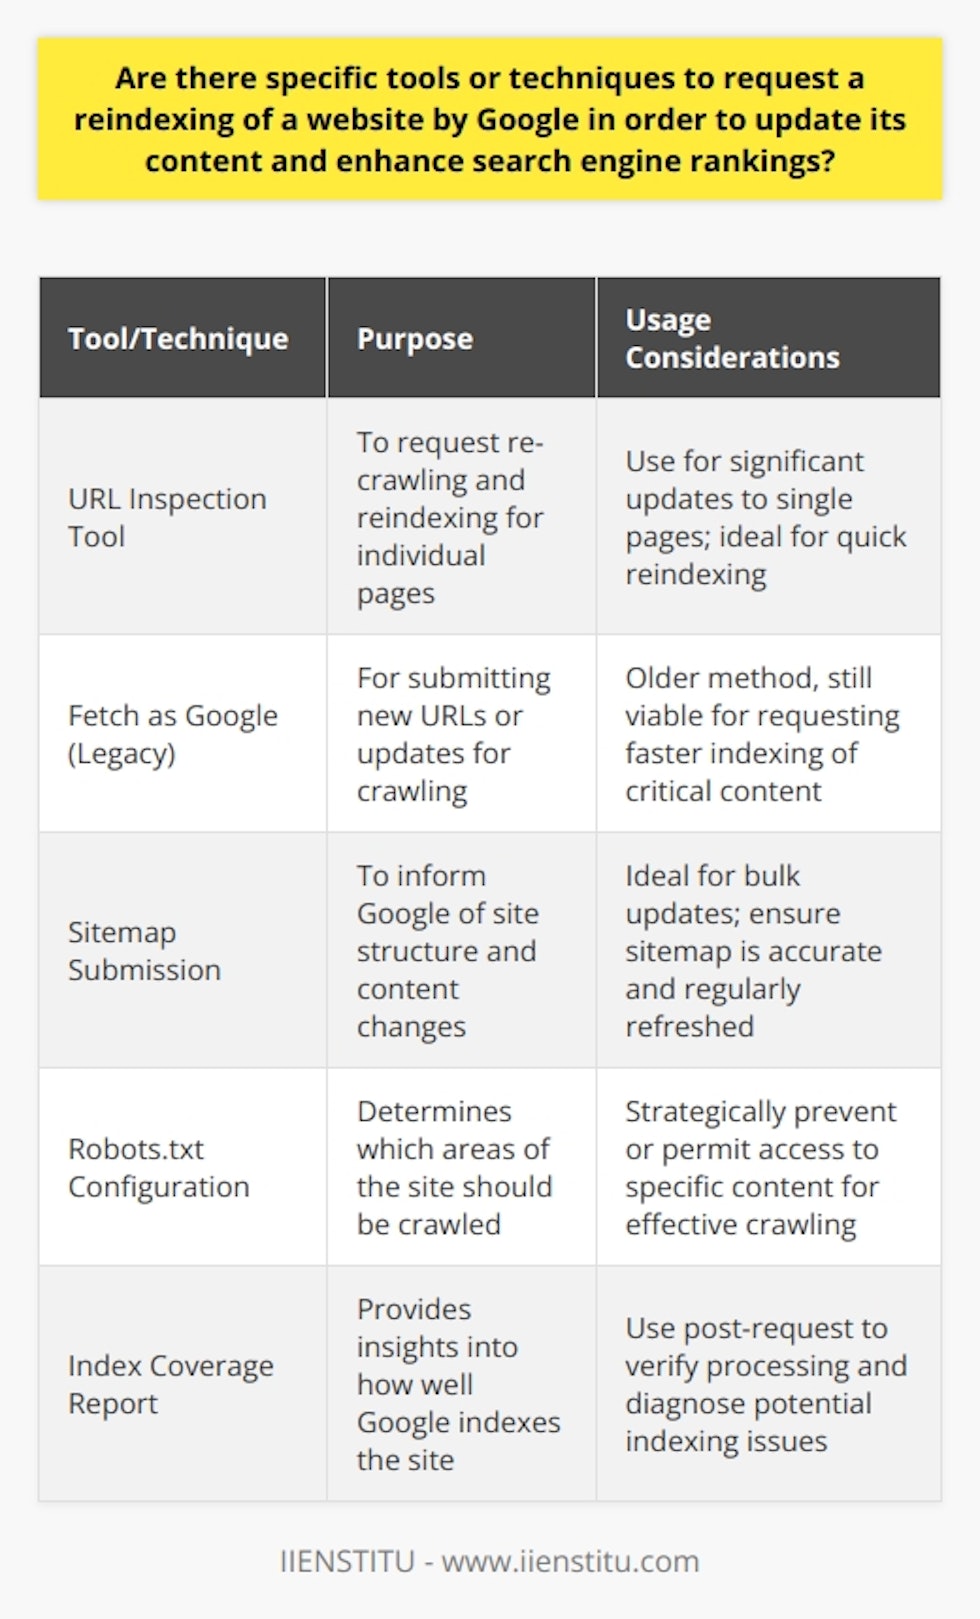 When you've made significant updates to your website, ensuring Google reflects these changes promptly can pivot on smart use of reindexing tools and techniques. One of the most reliable methods for professionals is utilizing Google's Search Console, an essential tool for any website owner's digital toolkit.Utilizing Google's Search Console for Effective ReindexingThe URL Inspection tool within Google’s Search Console empowers webmasters to directly nudge Google to crawl and reindex updated content on a page-by-page basis. It is specially designed for occasional use when important updates are made to individual pages.For example, if you've restructured a key section of your site, corrected critical errors, implemented a redesign, or updated content that significantly changes the page's context or value, requesting reindexing is a prudent step. Additionally, webmasters can leverage the “Fetch as Google” feature, submitting new URLs or critical updates for faster indexing.Sitemap Submission: A Proactive MeasureTo support the reindexing process proactively, maintaining an up-to-date XML sitemap is invaluable. Webmasters should regularly update their sitemaps and submit them to Google via the Search Console whenever significant changes are made. An accurate sitemap acts as a guide to Google's bots, enhancing their understanding of the site structure and the importance and relationship of the pages.The Strategic Use of Robots.txtA well-configured Robots.txt file is pivotal for reindexing strategy, guiding search engine bots to prioritize relevant pages and content types. This file tells Google's crawlers which areas of your site should be indexed and which should be ignored, allowing webmasters to conserve crawl budget for the most valuable pages on their sites.Understanding the Impact on SEOIt's crucial to underscore that reindexing is not a silver bullet for SEO. While it does ensure that Google has the most current view of your site, the actual ranking is a multifaceted affair, heavily dependent on the quality of content, backlinks, mobile usability, page speed, and more.Expectation Management and Best PracticesThe reindexing process in Google's ecosystem is designed to respect the natural ebb and flow of the web. Even with these tools at hand, reindexing is subject to Google's schedules and algorithms. Patience in waiting for Google's bots to revisit the site is advised, and restraint is key; excessive requests can backfire.Search Console provides a report titled Index Coverage that helps webmasters understand how well Google is indexing the site and diagnose any issues. It's wise to check this report after requesting reindexing to verify that Google is processing your site as intended.In essence, while requesting a reindex via tools like Google's Search Console is straightforward, it cannot artificially inflate SEO rankings. Effective use coincides with a broader strategy encompassing website usability, content quality, and technical SEO—one where updated content is king, but the reindexing tools serve as the herald.